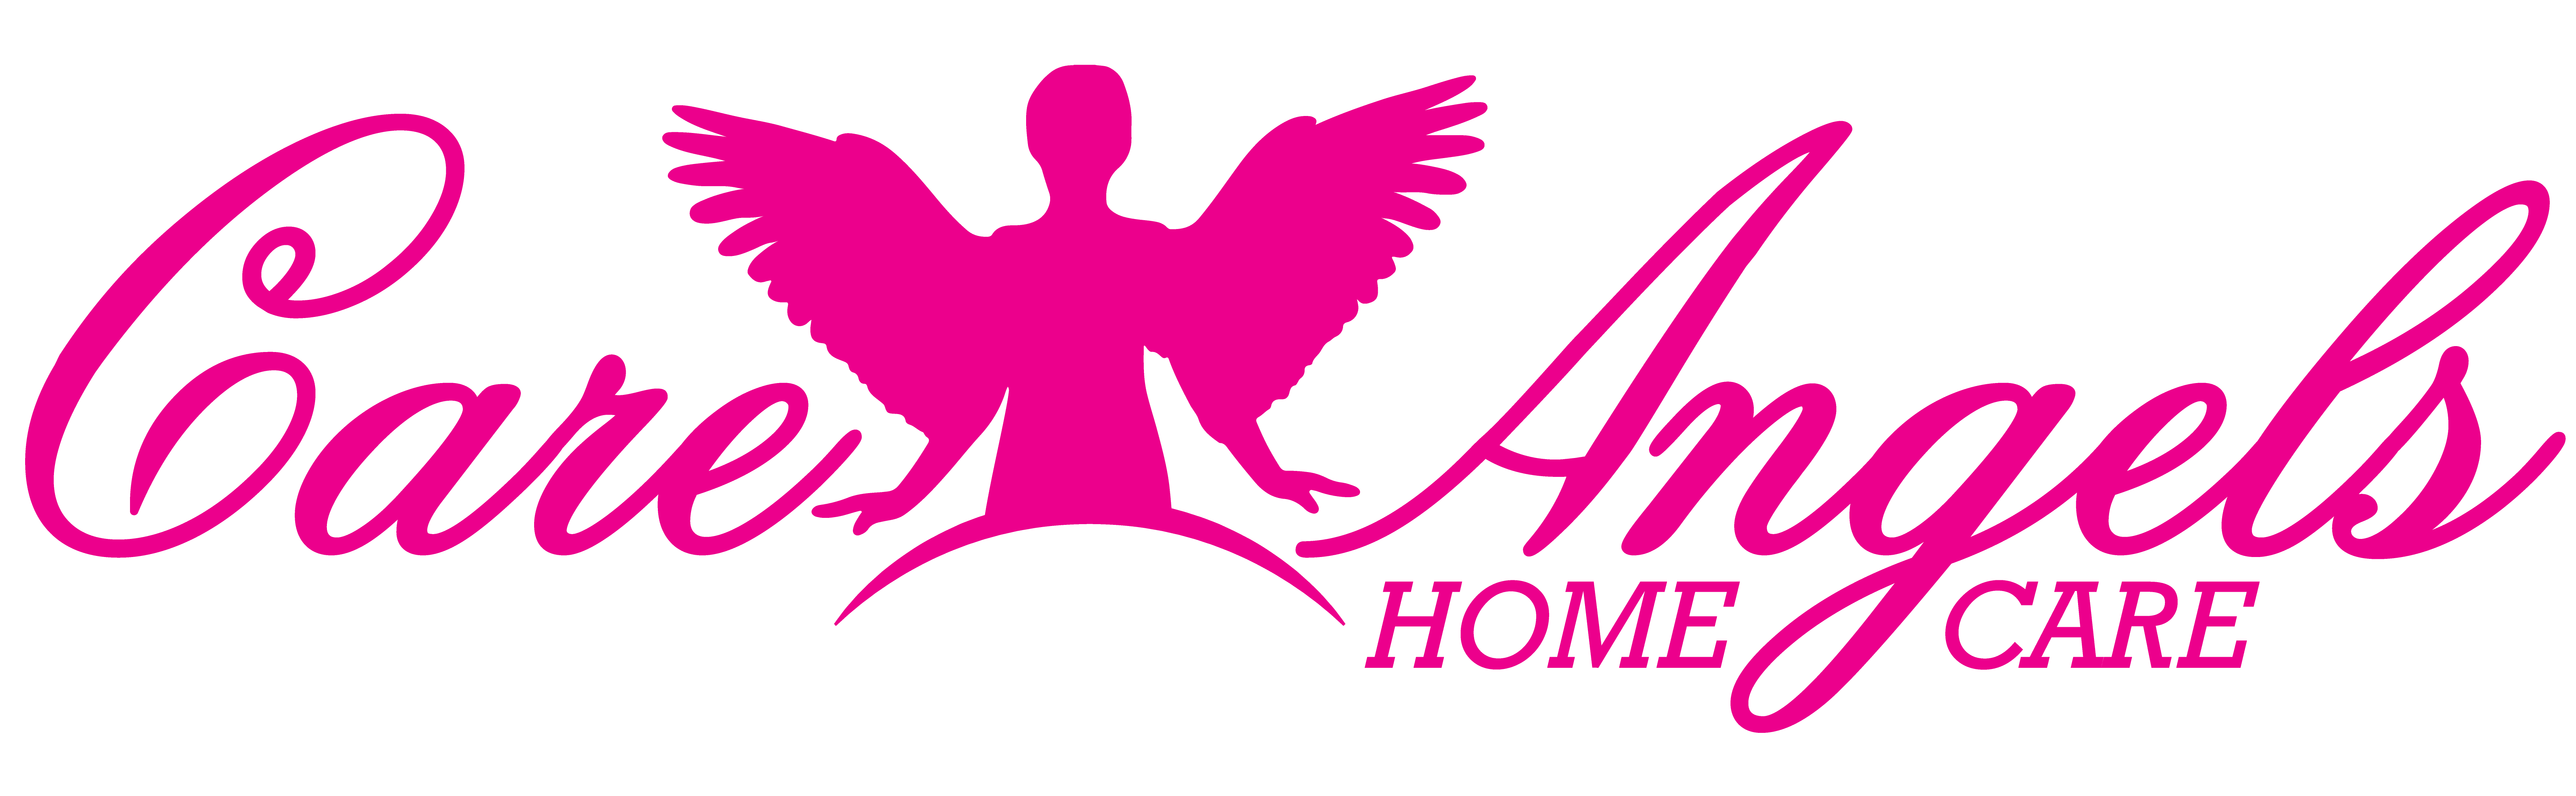 Care Angels Homecare